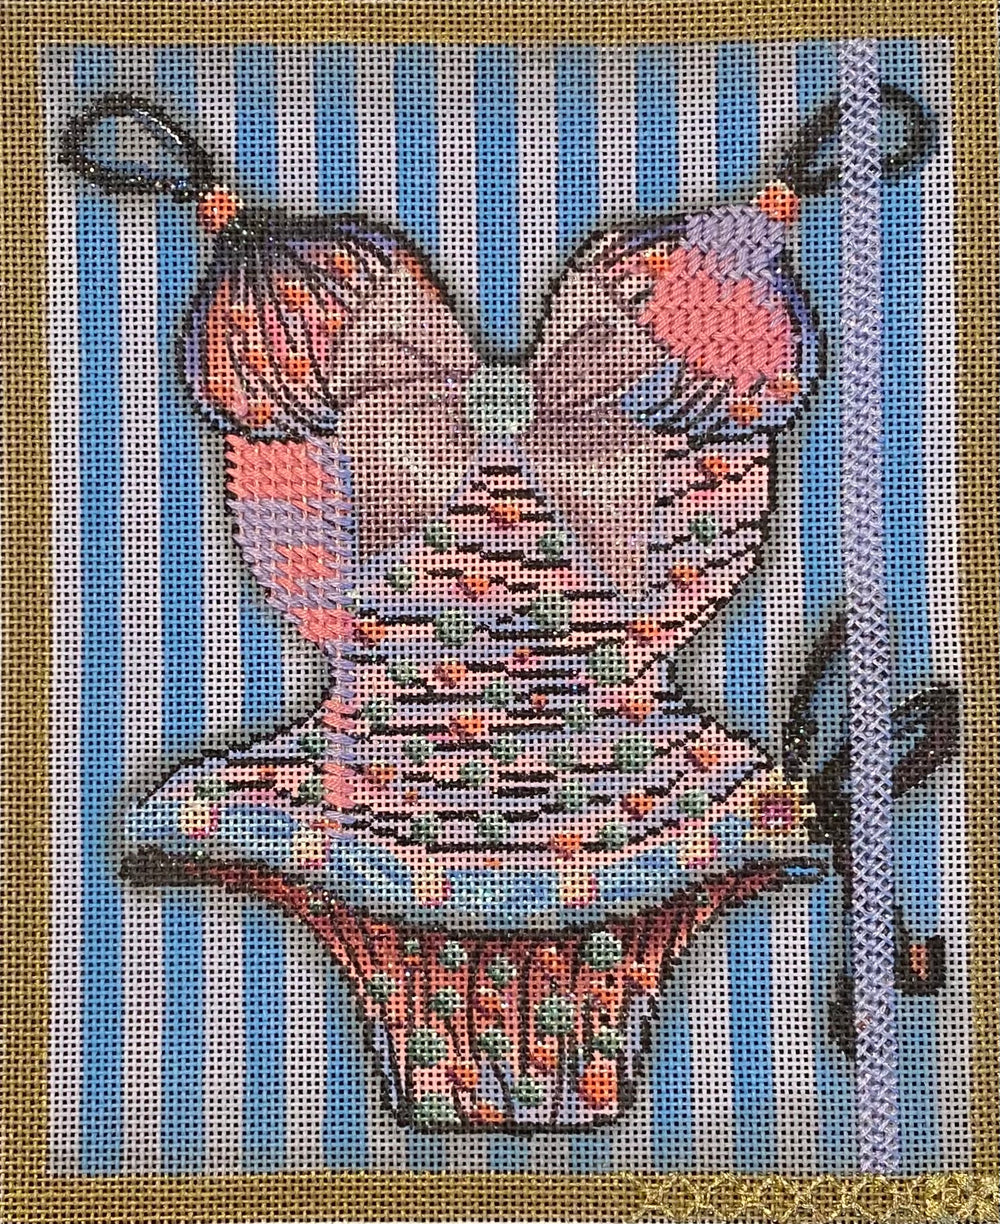 Blue Beaded Teddy - some stitching